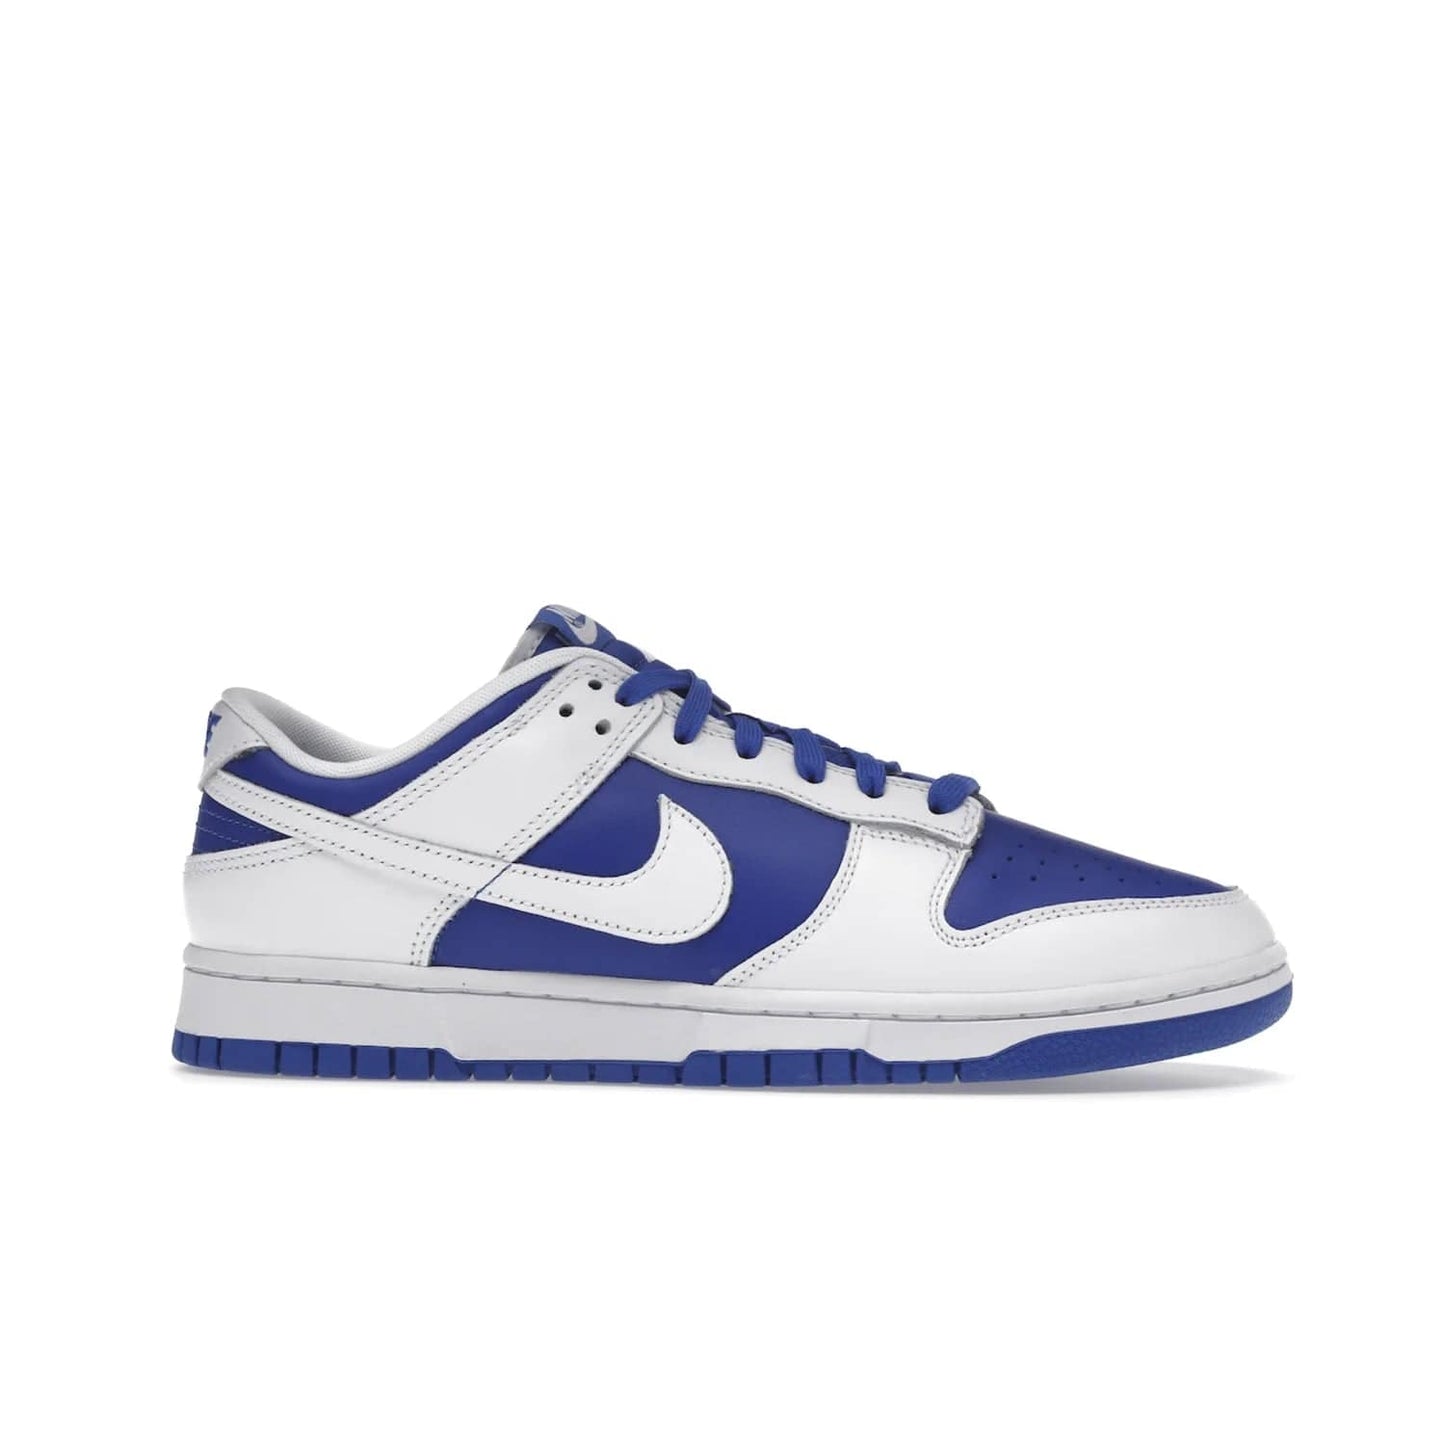 Nike Dunk Low Racer Blue White - Image 2 - Only at www.BallersClubKickz.com - Sleek Racer Blue leather upper and white leather overlays make up the Nike Dunk Low Racer Blue White. Woven tag and heel embroidery for a 1985 Dunk look with a matching EVA foam sole completes the classic colorway.